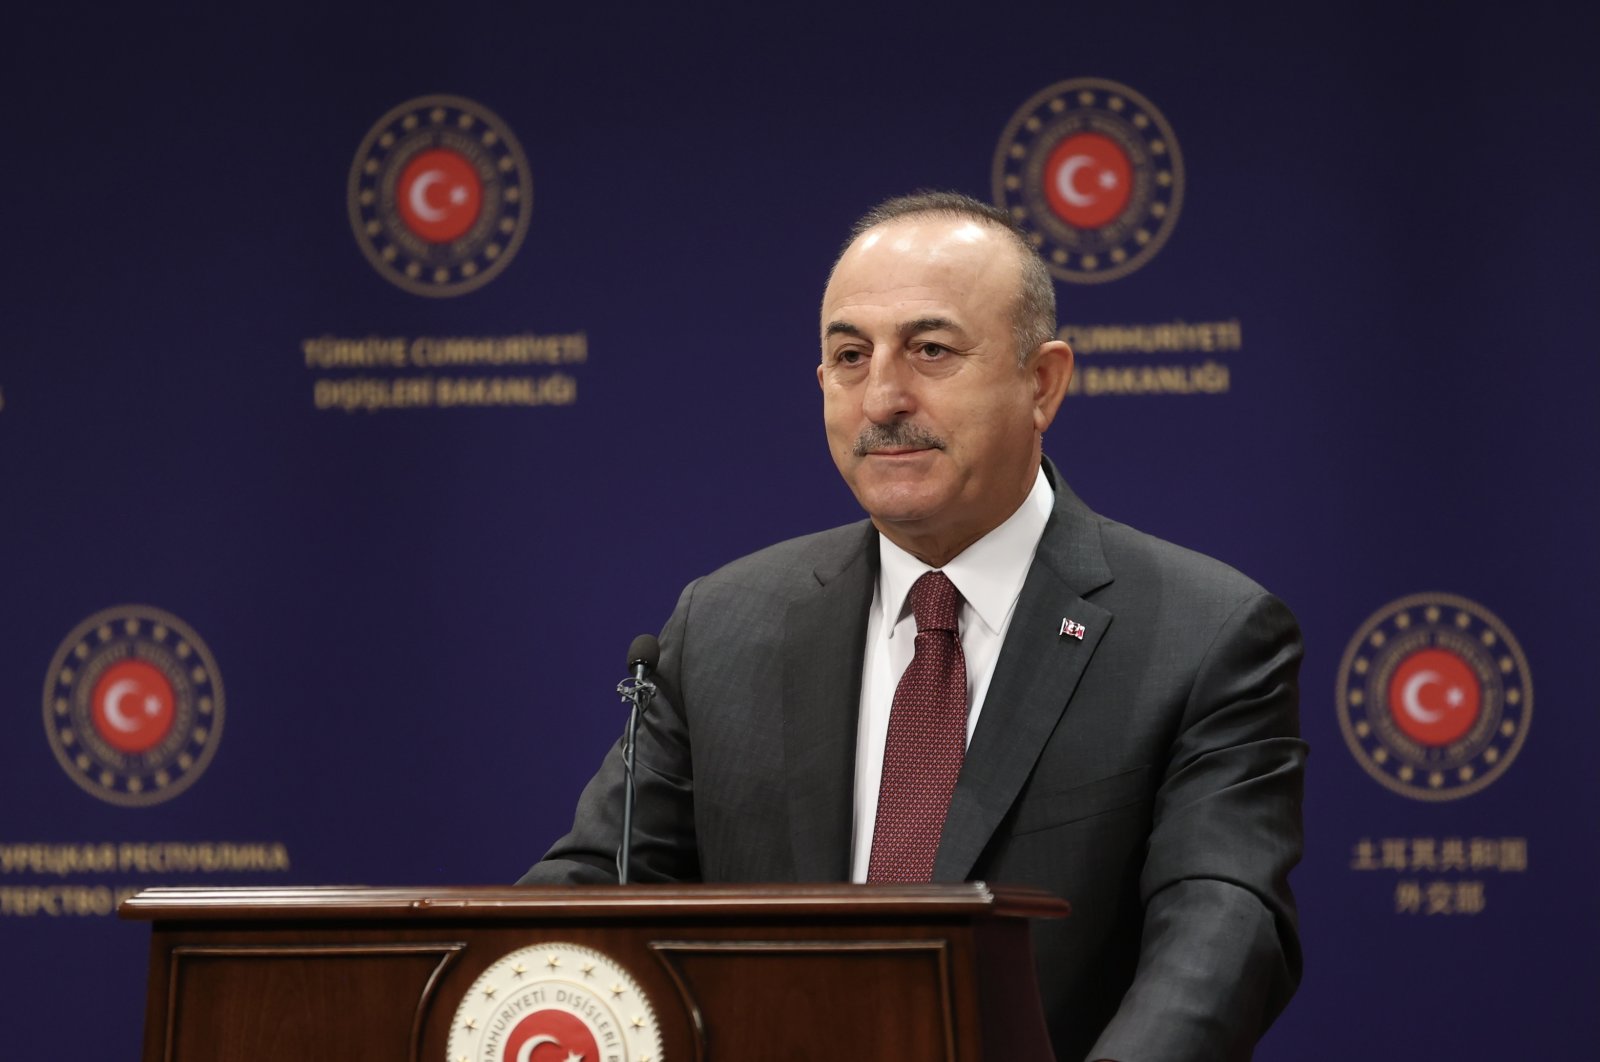 Foreign Minister Mevlüt Çavuşoğlu speaks at a joint press conference with his Venezuelan counterpart in Ankara, Turkey, Oct. 9, 2021. (AA Photo)